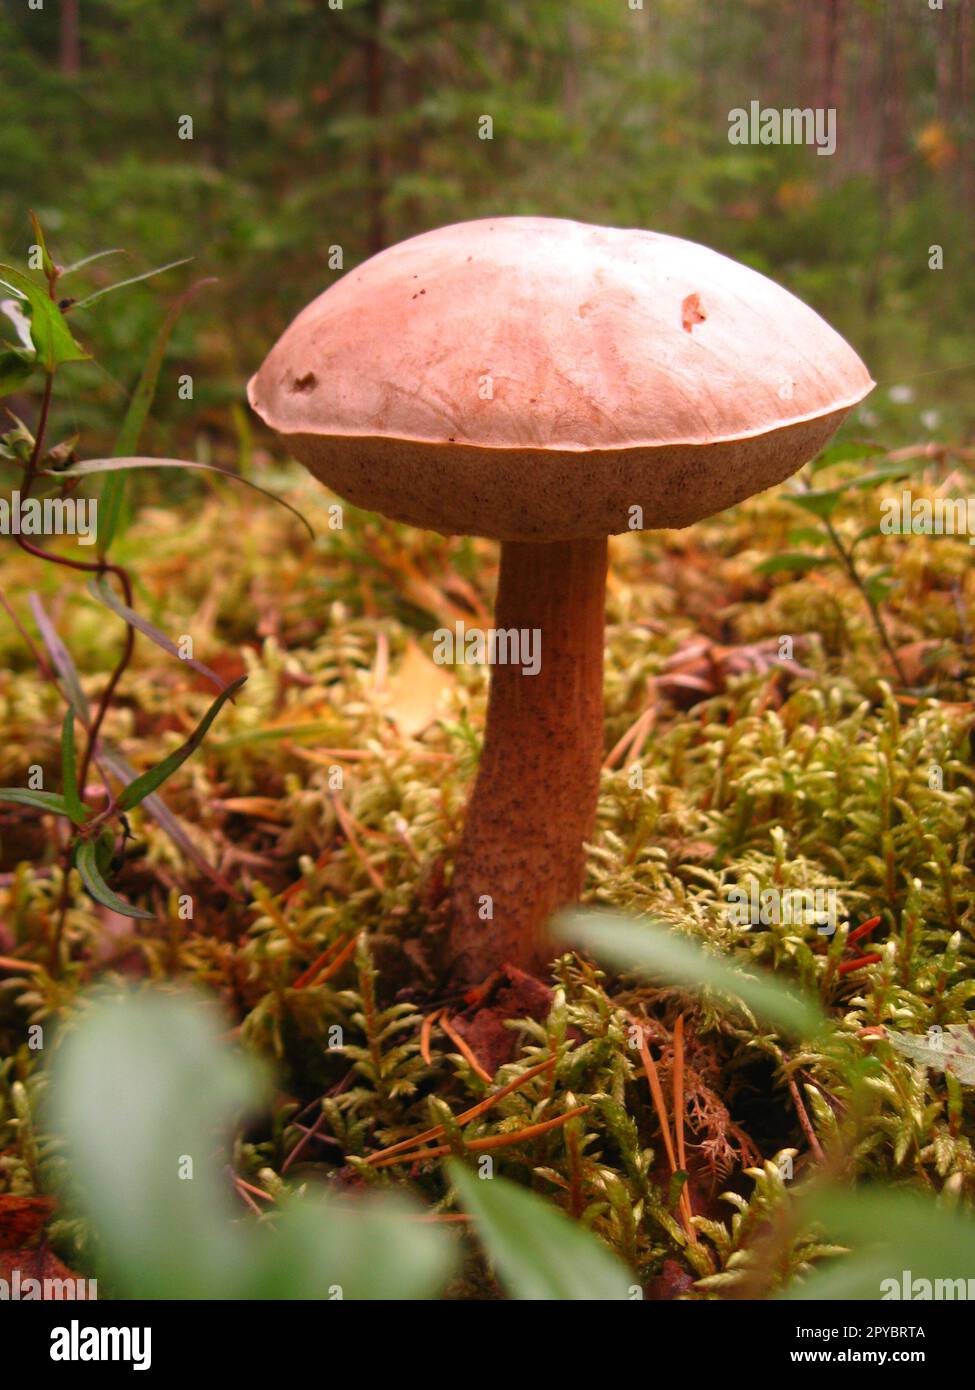 Edible forest mushroom. Beautiful, large, smooth boletus. Find in the forest. Good luck mushroomer. Mushroom with a red foot and pink-beige top. Product consumed by humans after heat treatment. Stock Photo